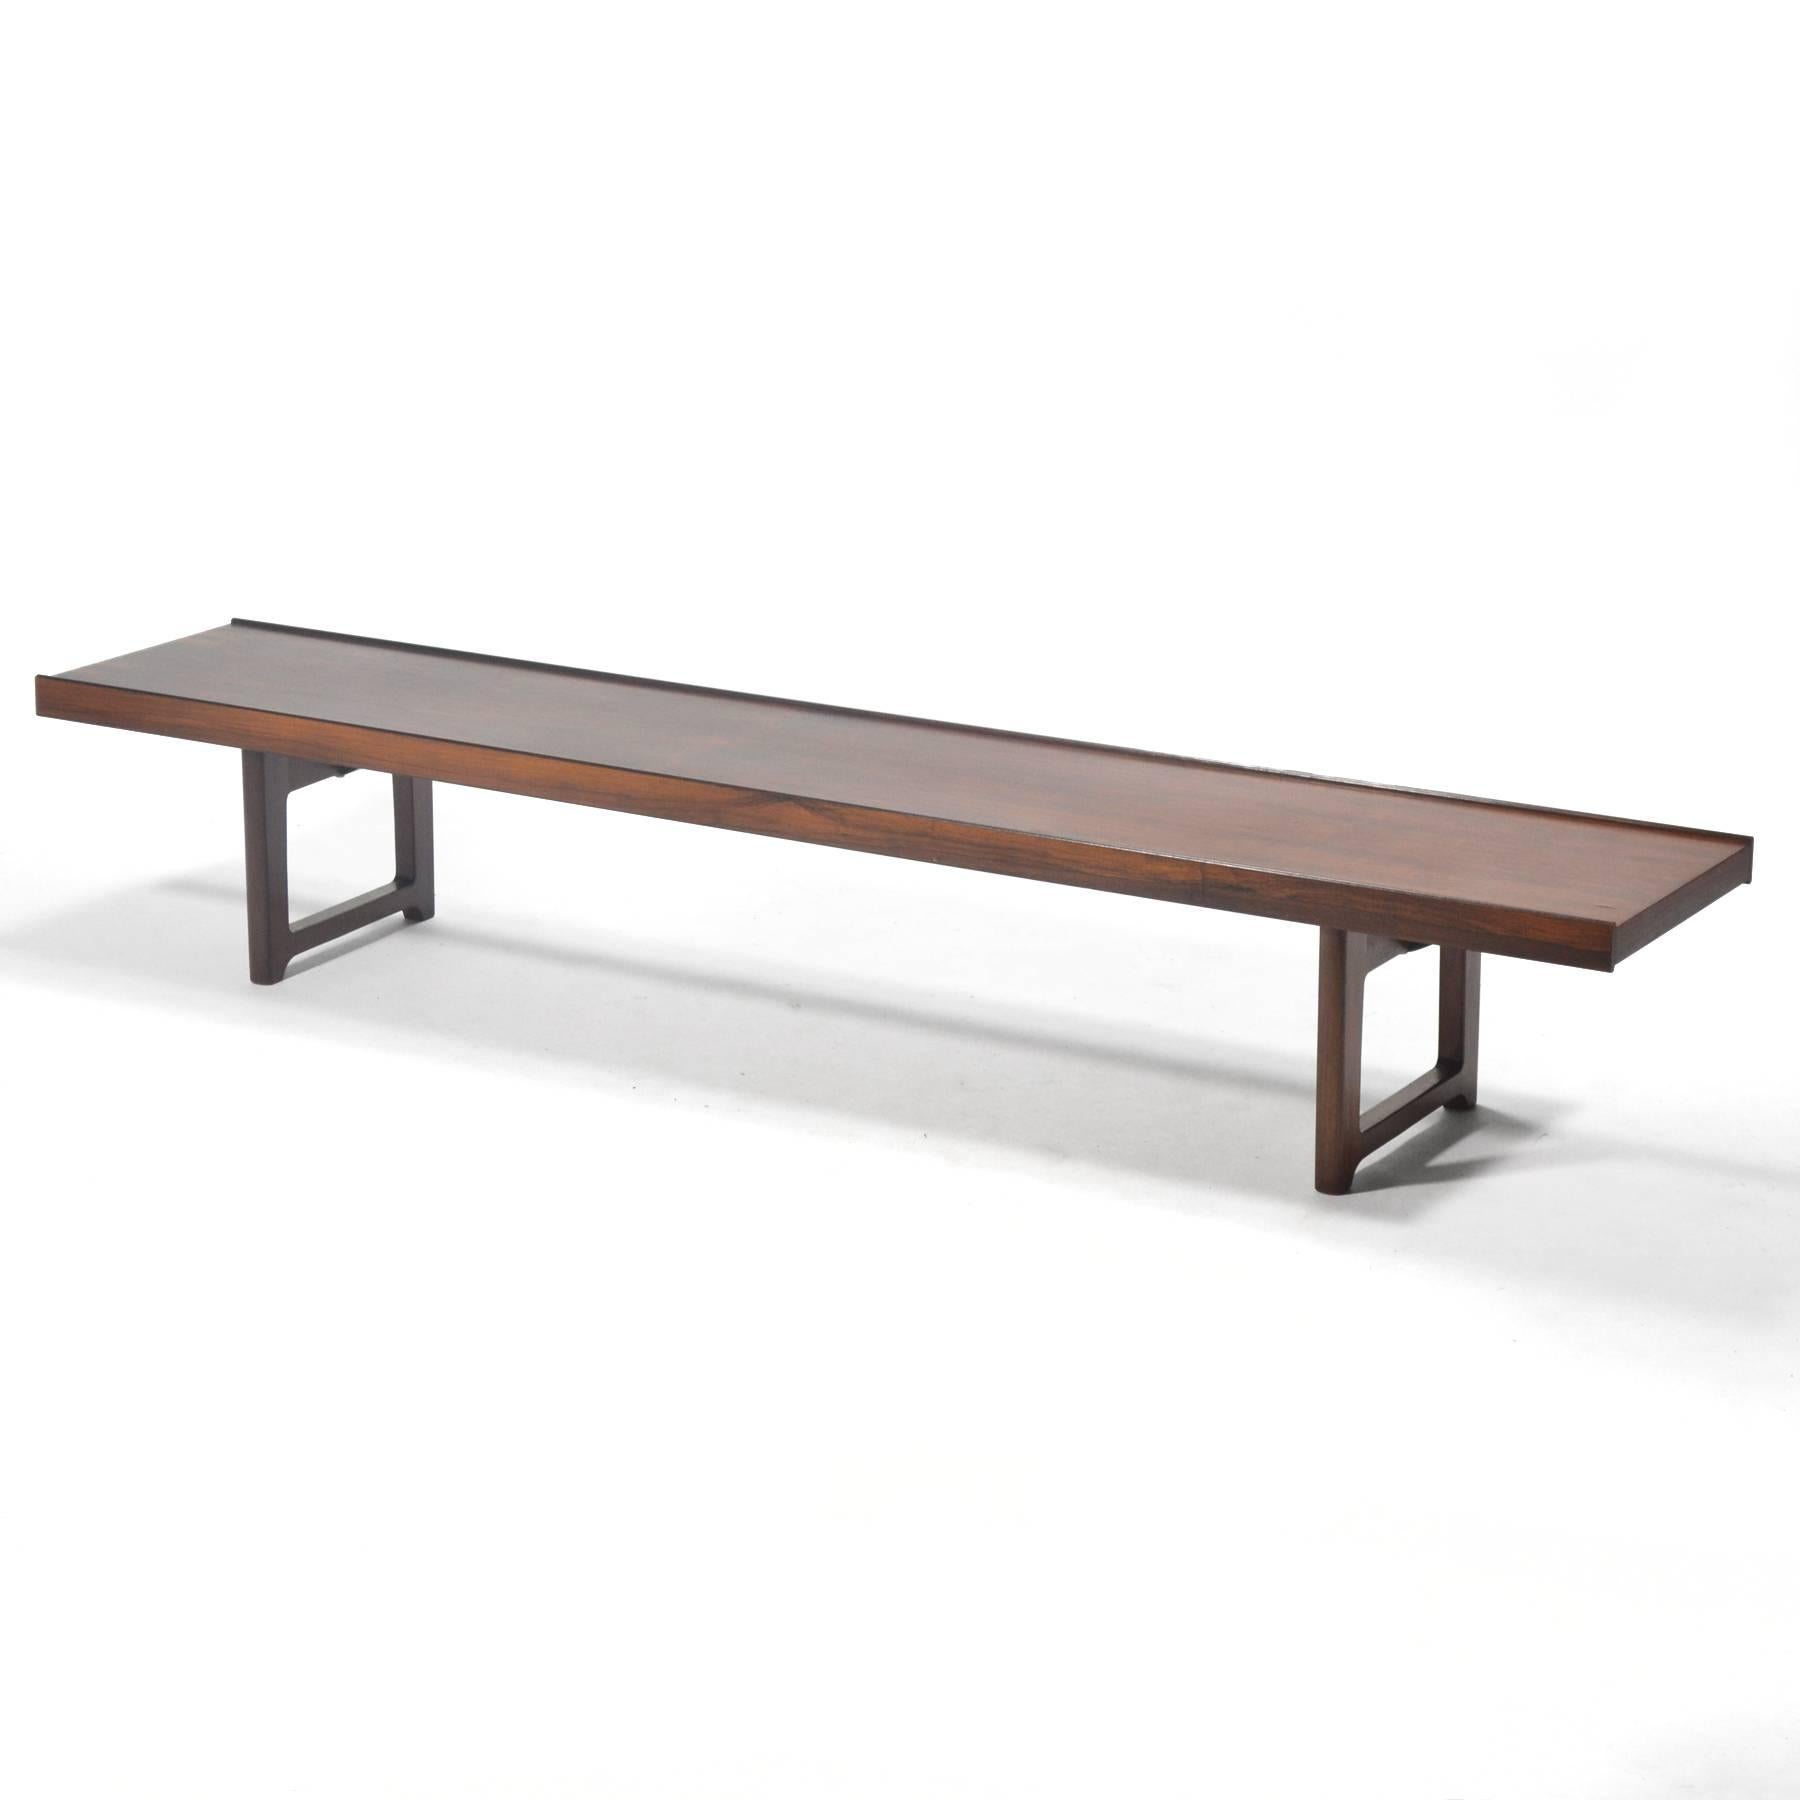 One of three we have available, this is the longest of the Torbjorn Afdal benches made by Mellemstrands Møbelfabrikk, for Bruksbo Norway, the 